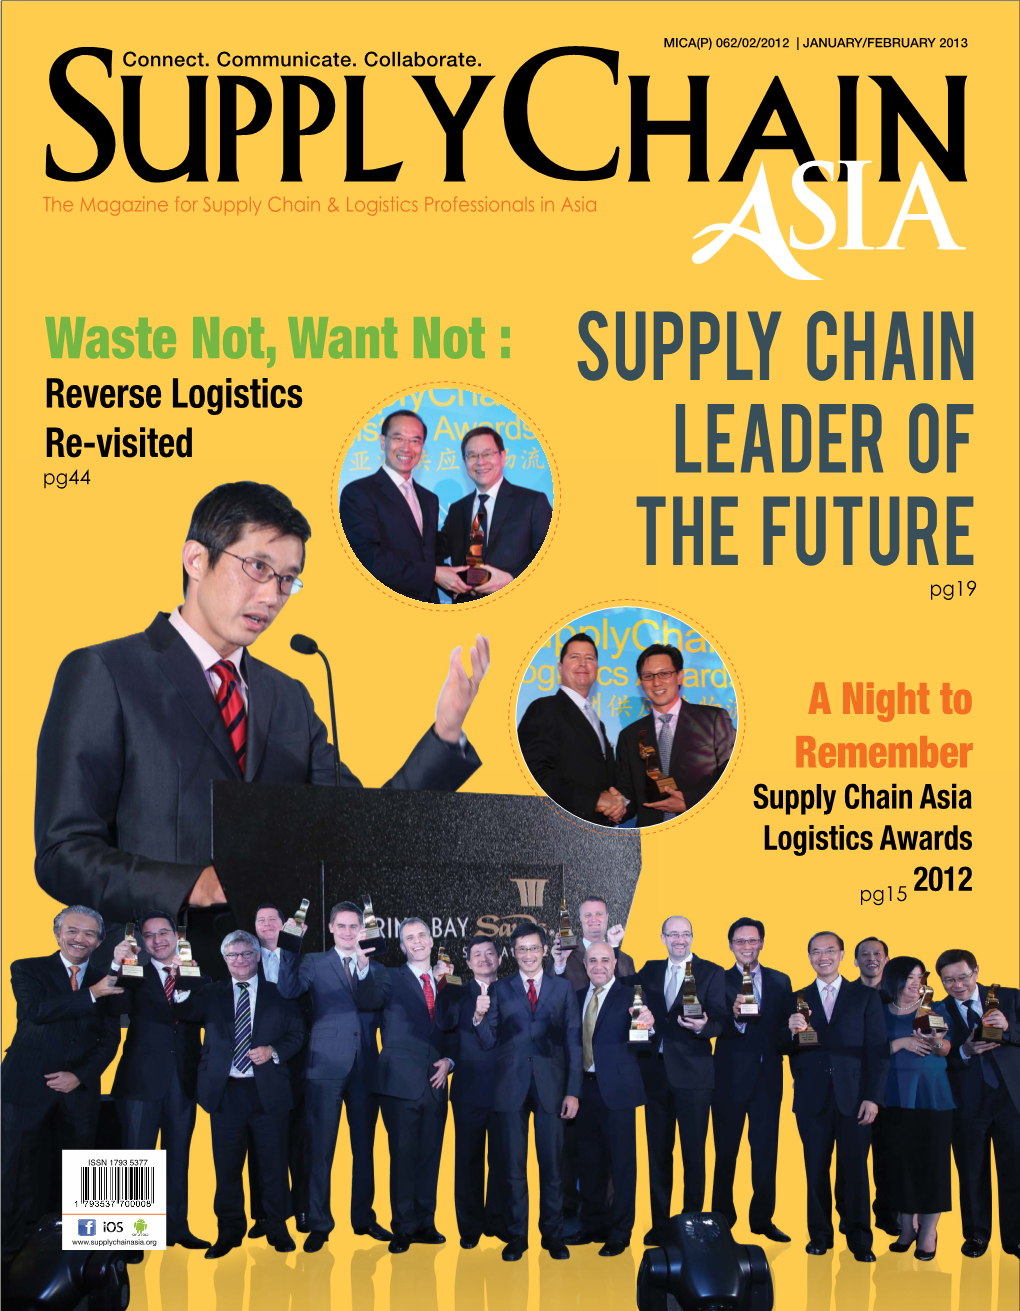 Supply Chain Leader of the Future